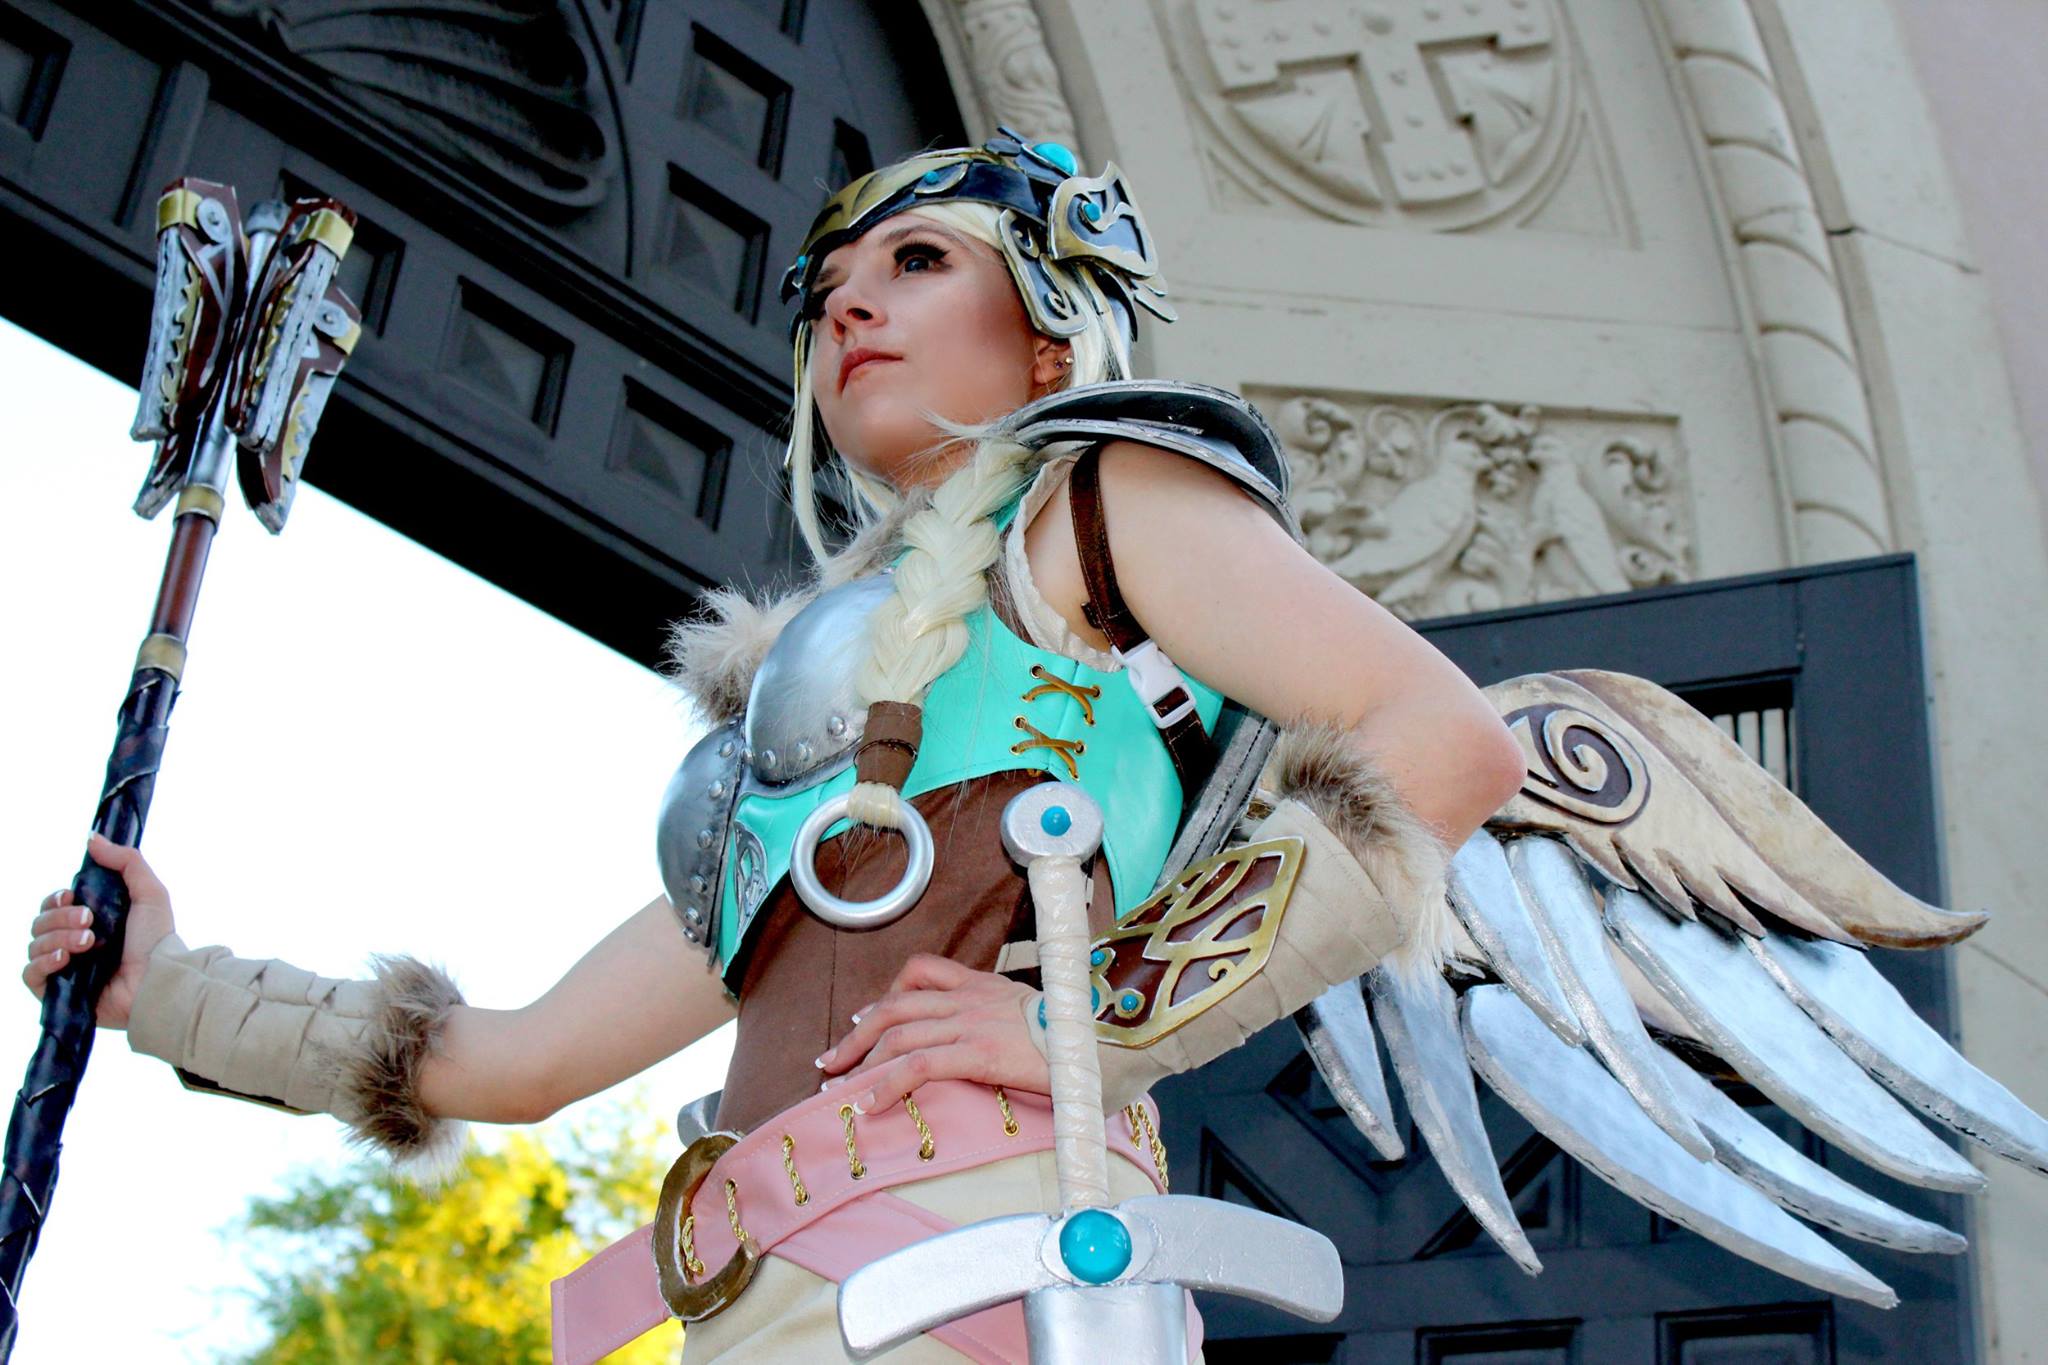 Overwatch: Valkyrie Mercy Cosplay by Le Petit Fromage